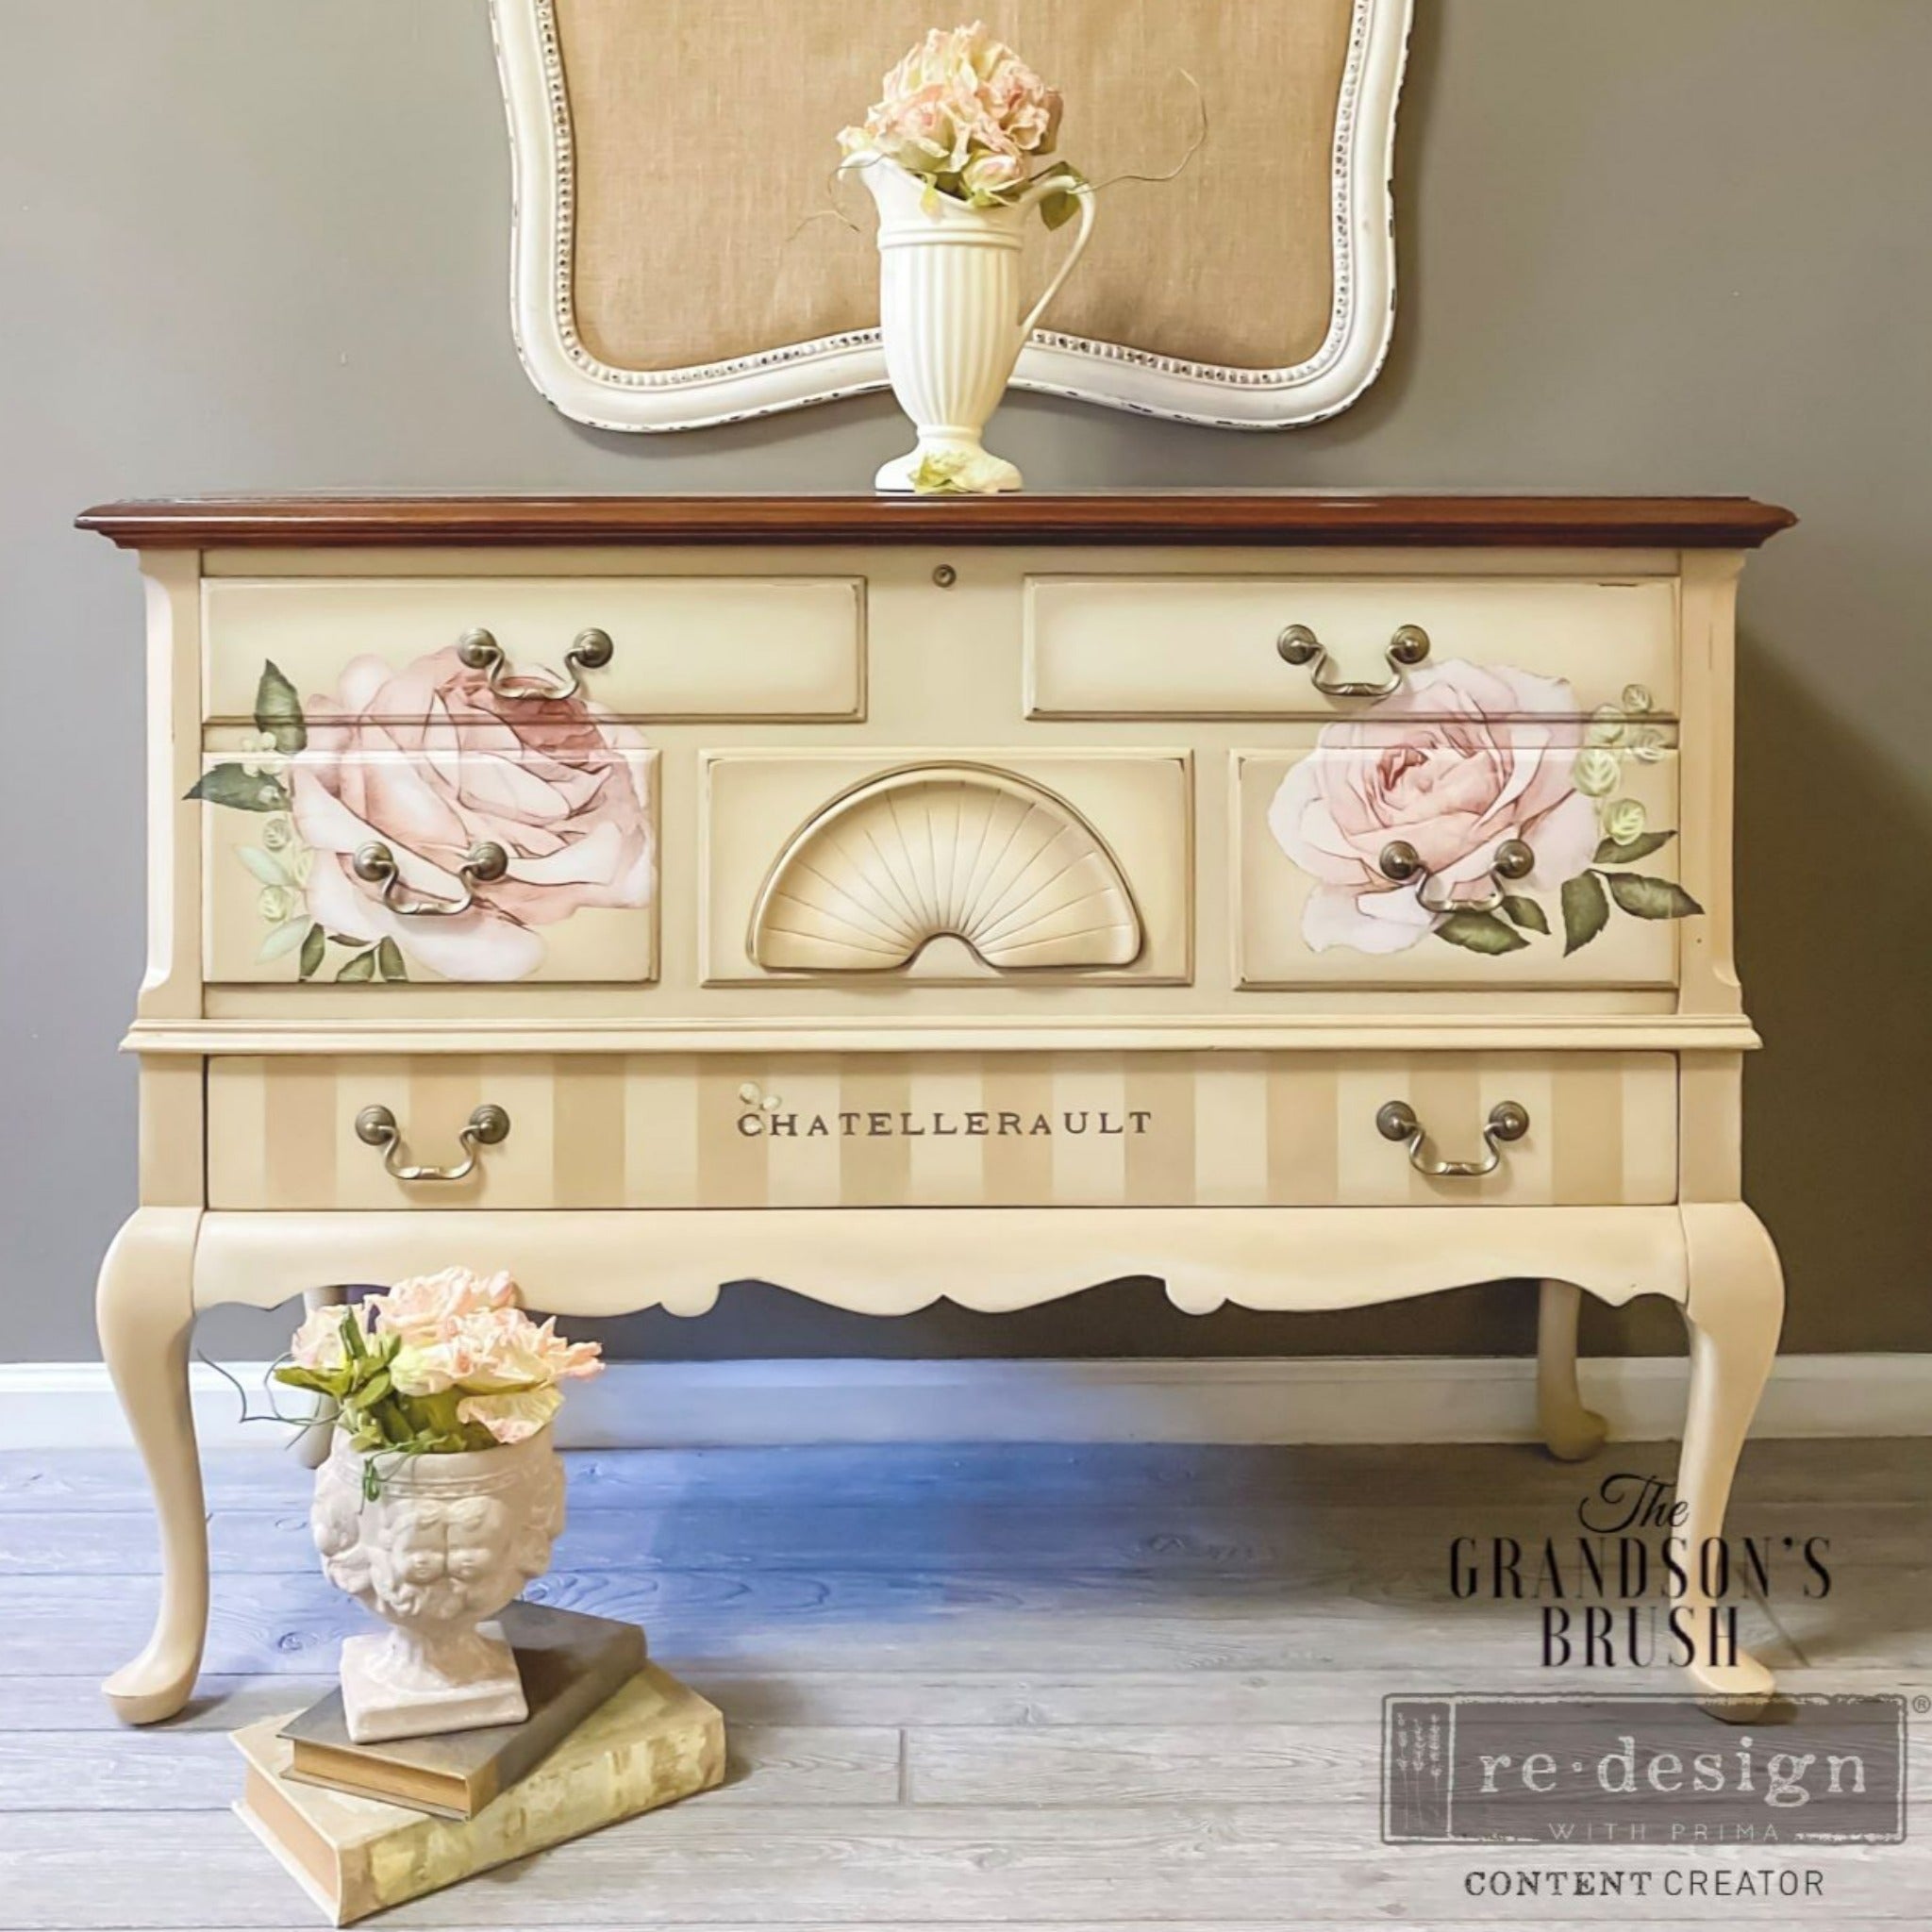 A vintage dresser refurbished by The Grandson's Bruh, a ReDesign with Prima Content Creator, is painted pale yellow and features the Chatellerault transfer on its drawers.